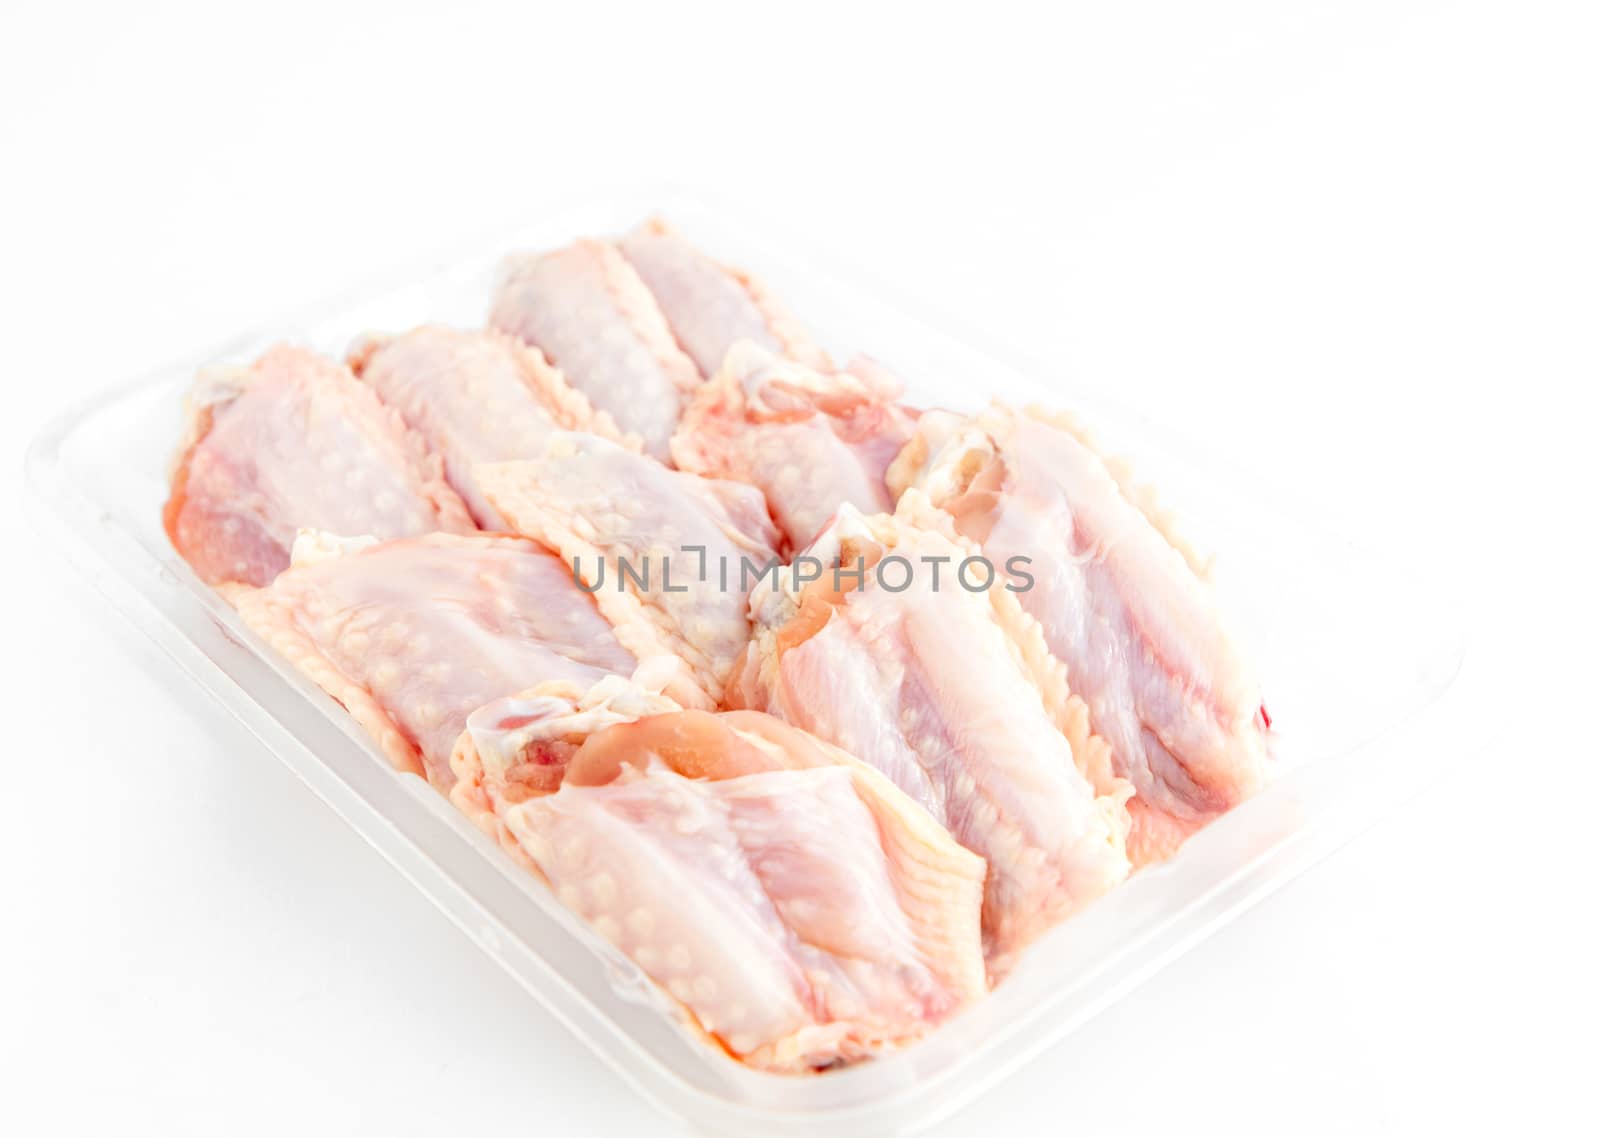 fresh Chicken middle wings in package on white background